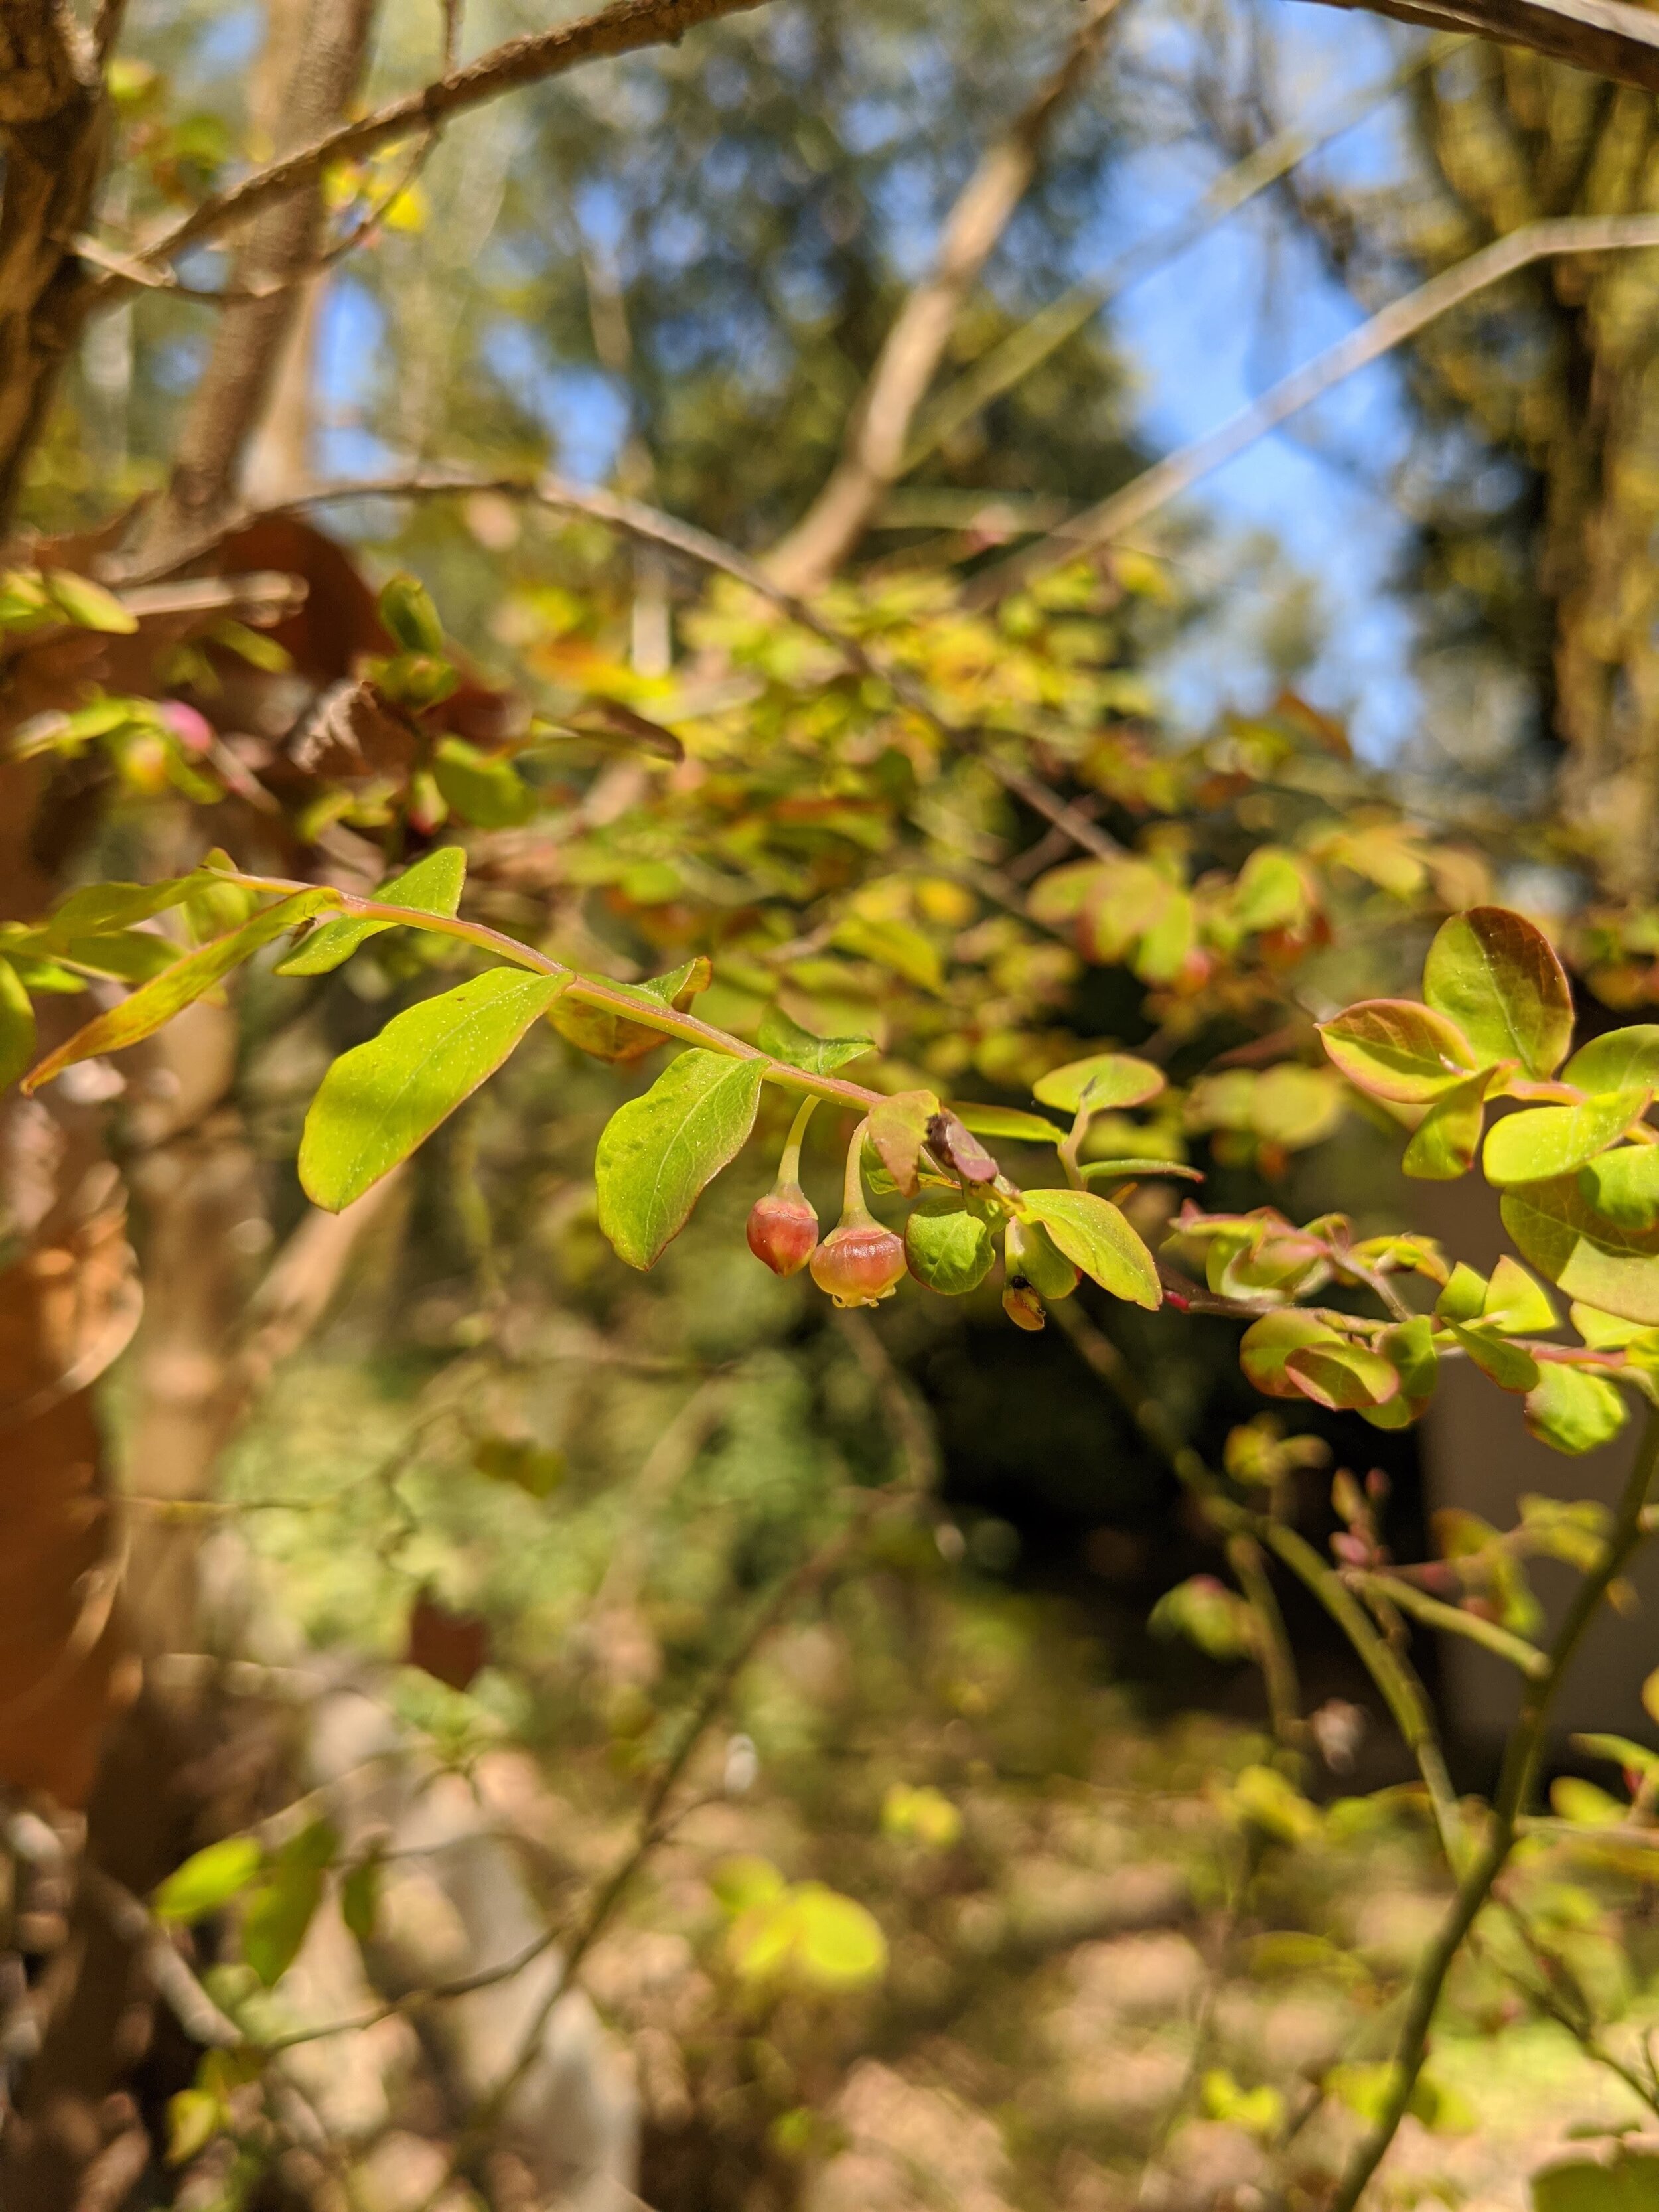 Red Huckleberry